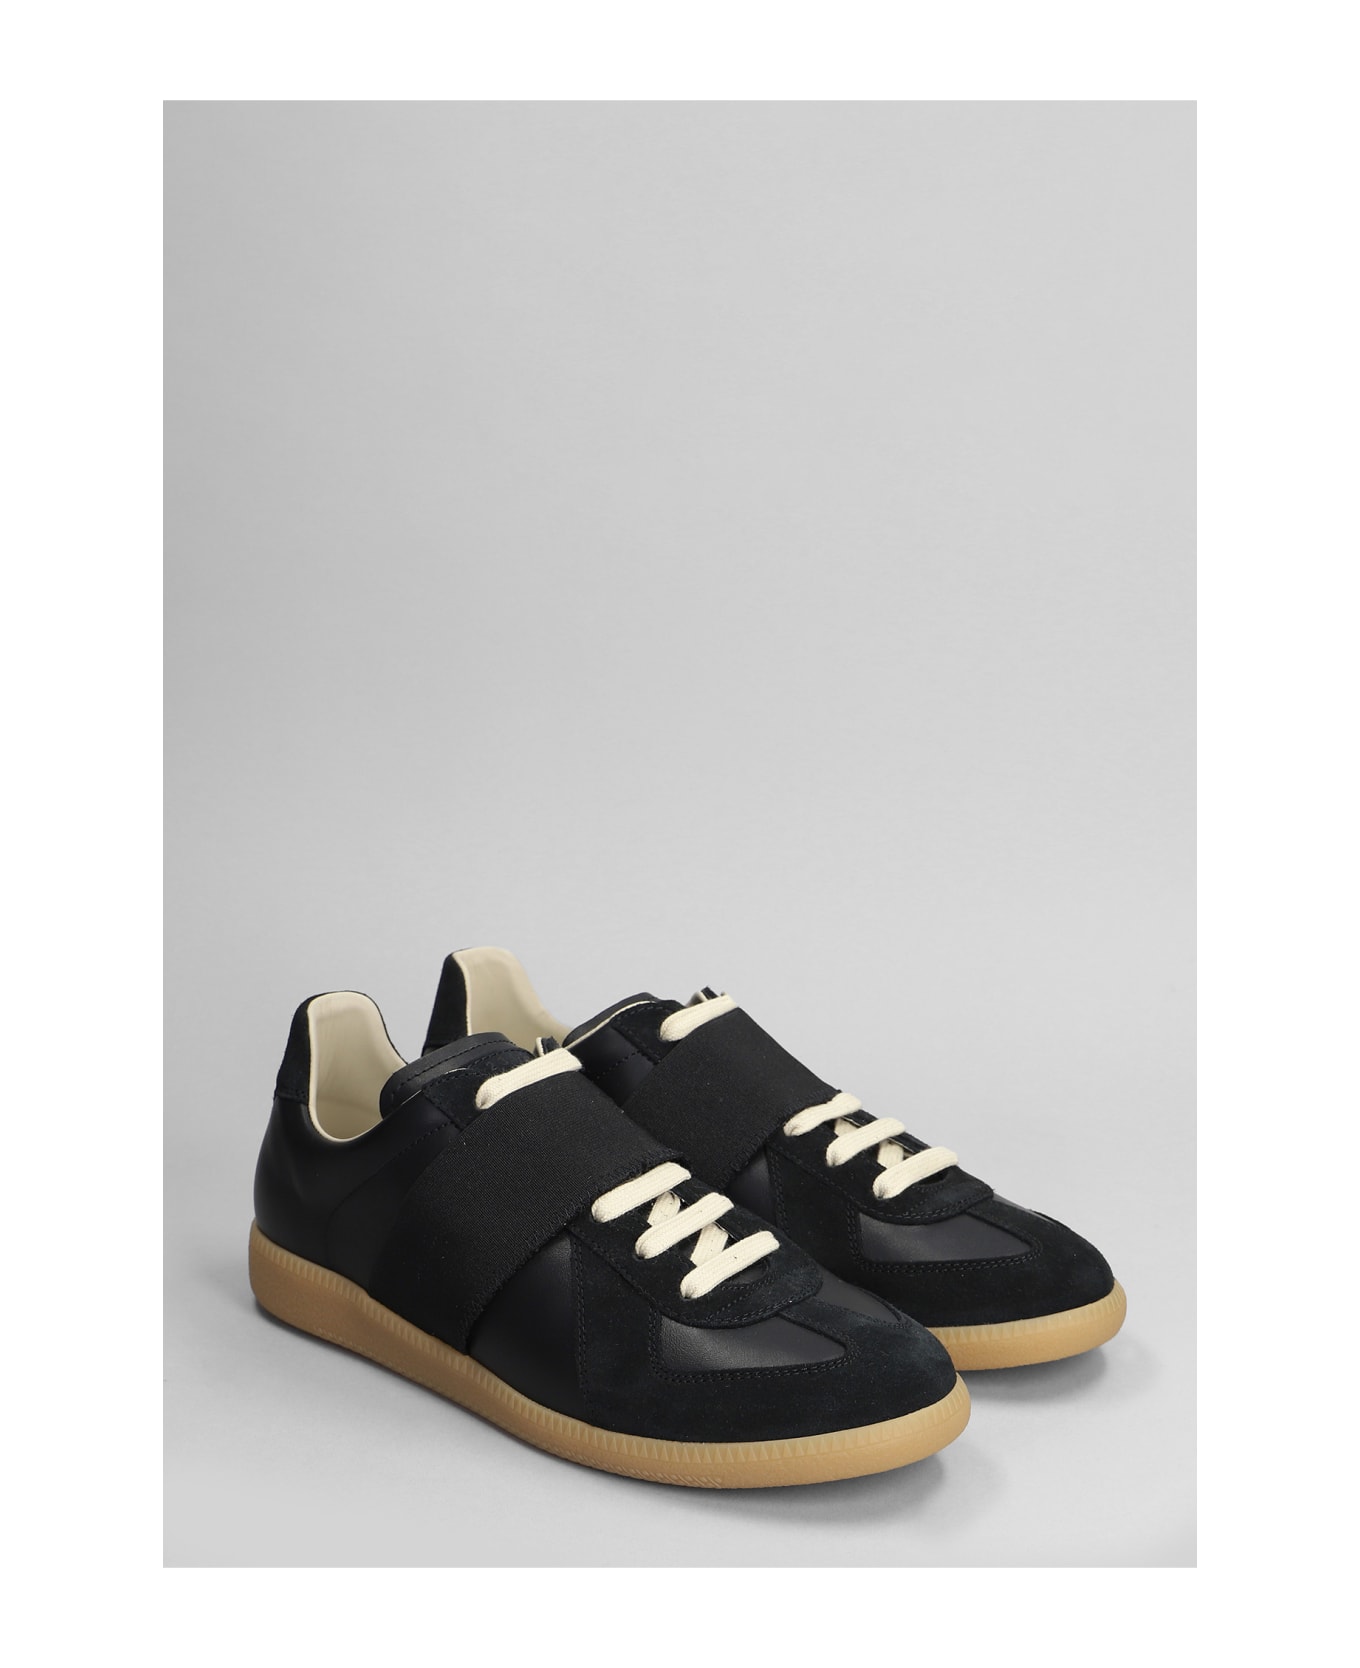 Maison Margiela Replica Sneakers In Black Suede And Leather - black